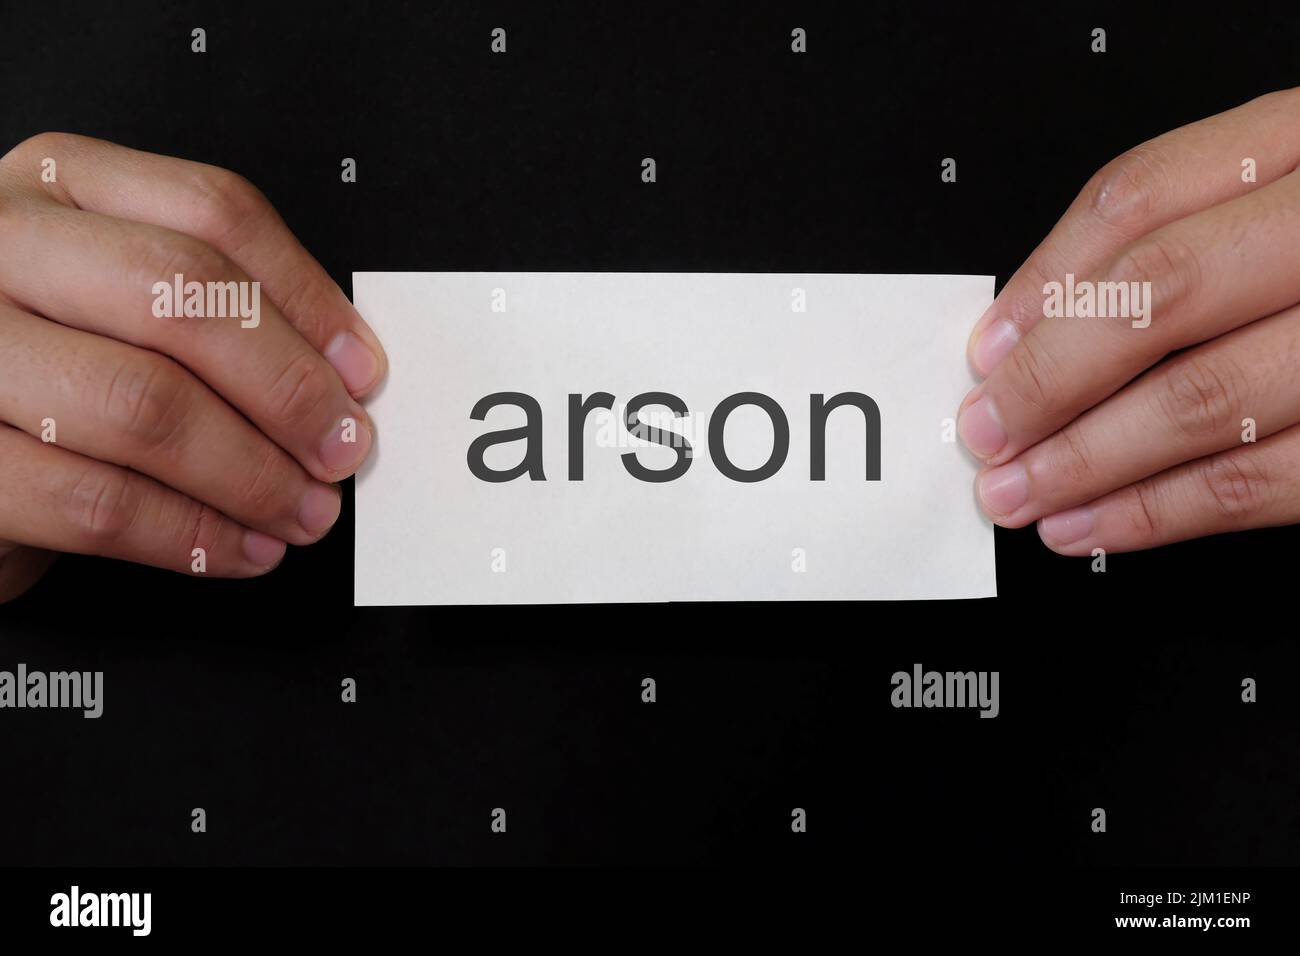 Arson crime case mug shot concept. Criminal hands holding paper placard with written word in dark black background. Stock Photo